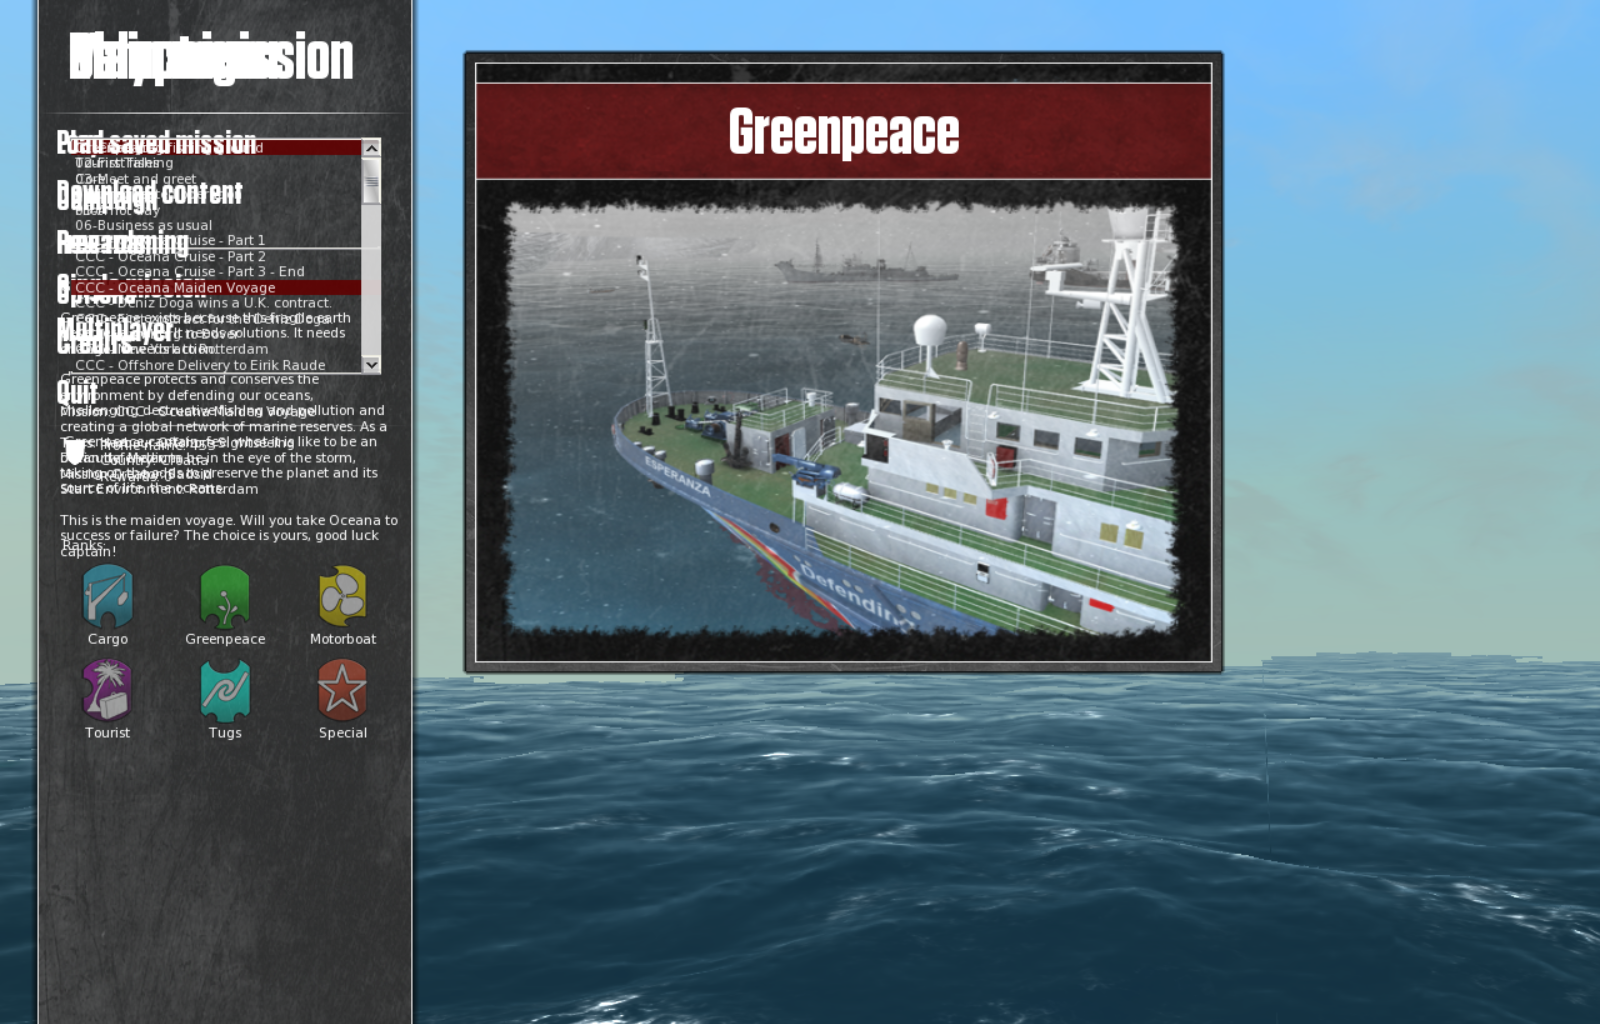 ship simulator extremes collection free download full version